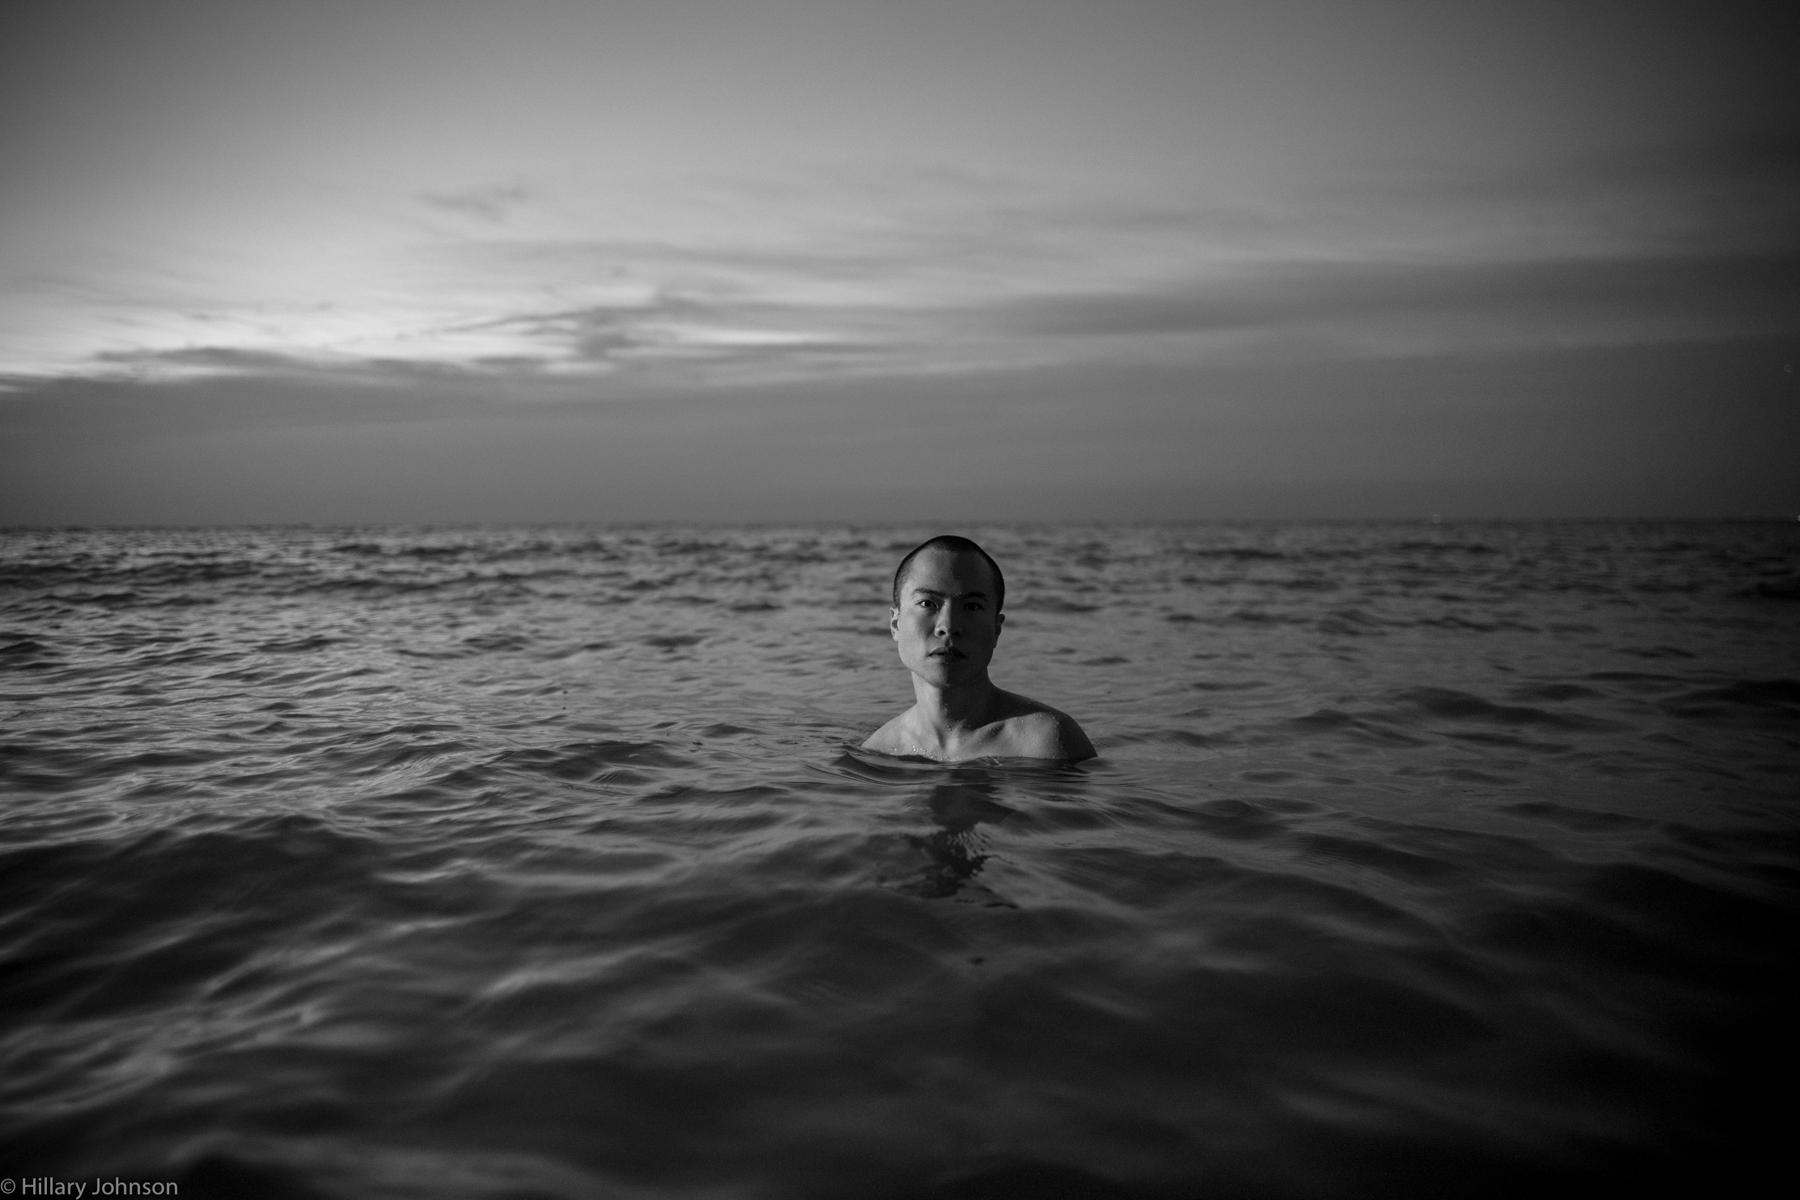  : THE WATERS WE SWIM IN : HILLARY JOHNSON PHOTOGRAPHY